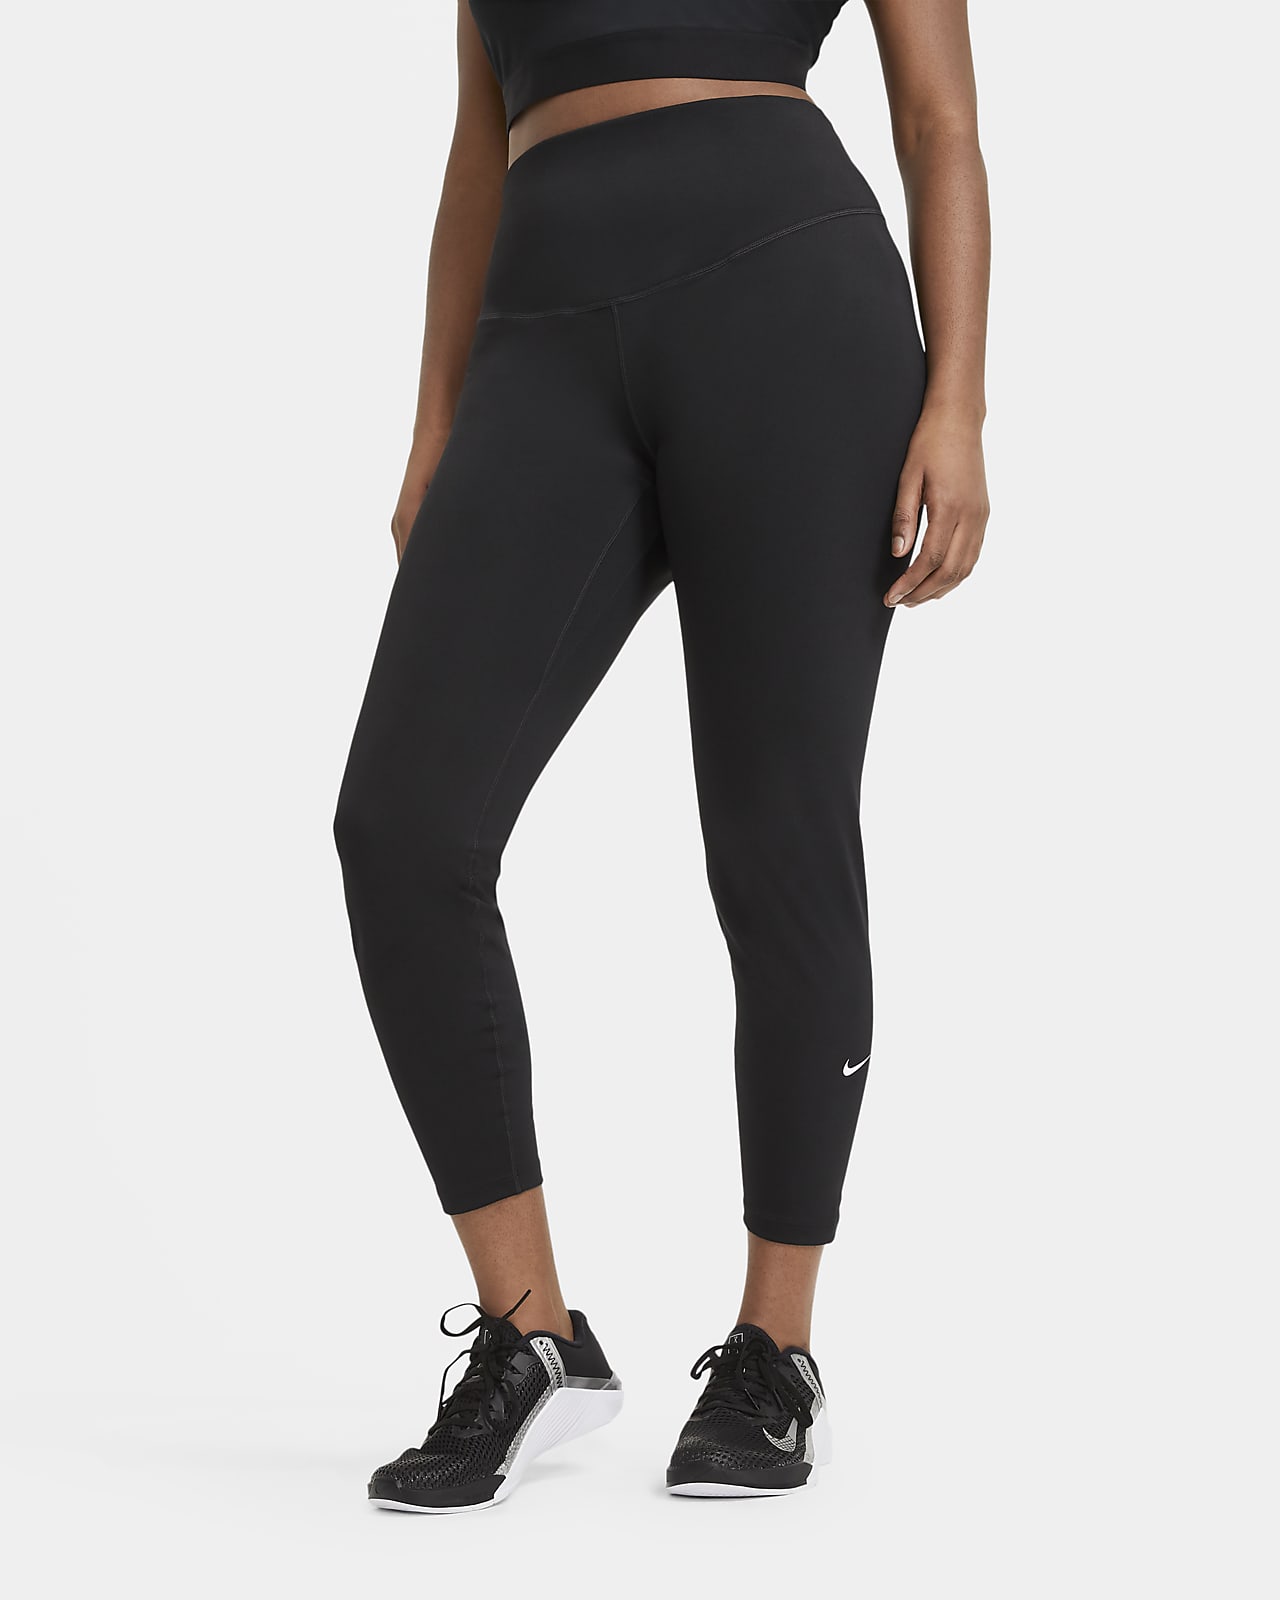 plus size nike sweat outfits